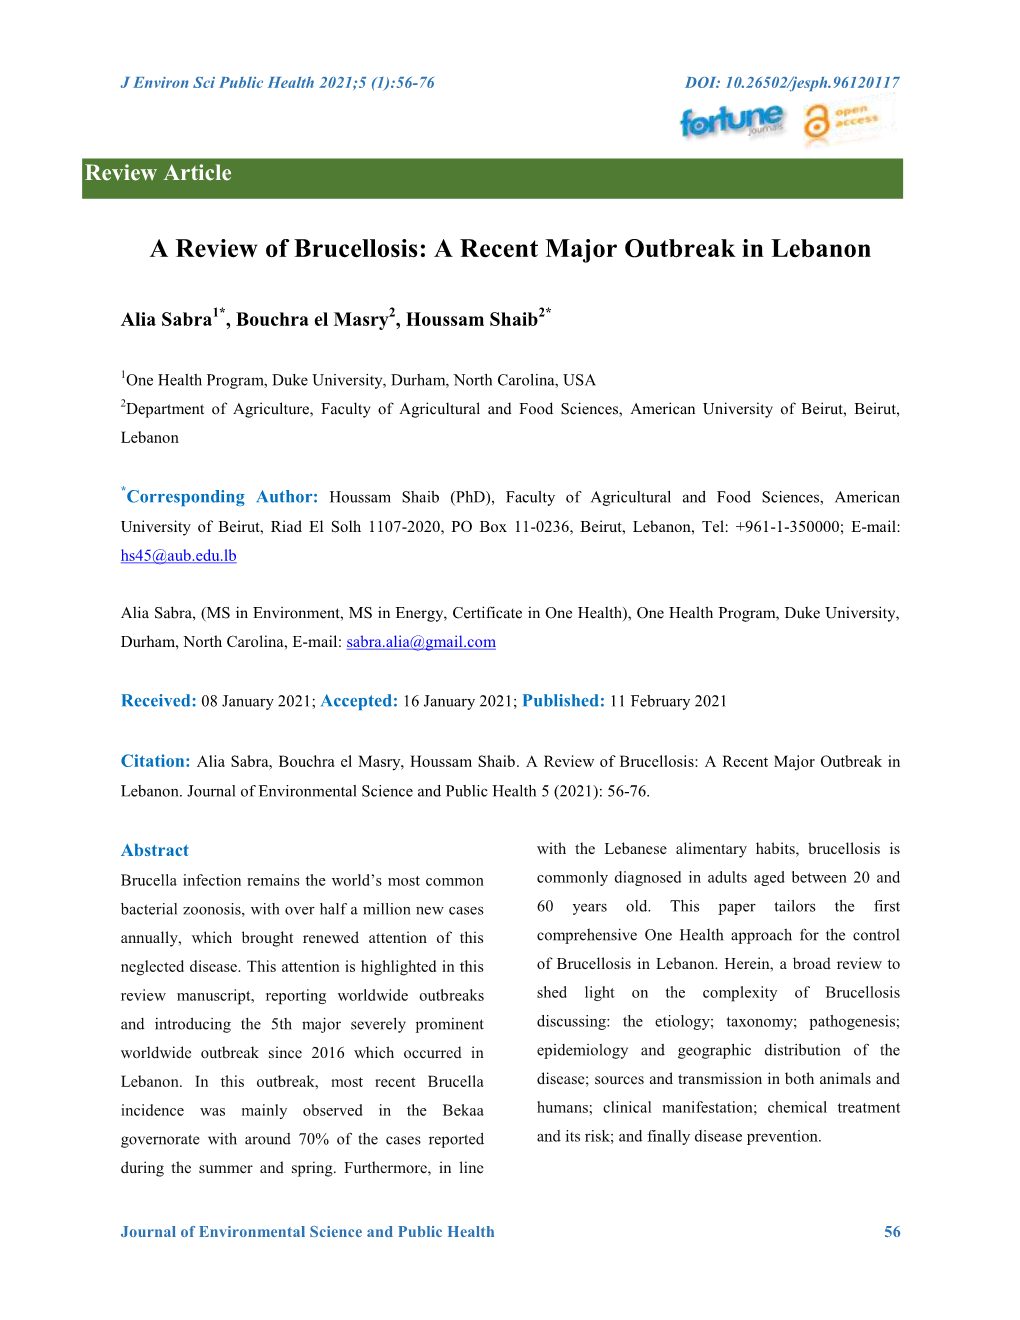 A Review of Brucellosis: a Recent Major Outbreak in Lebanon